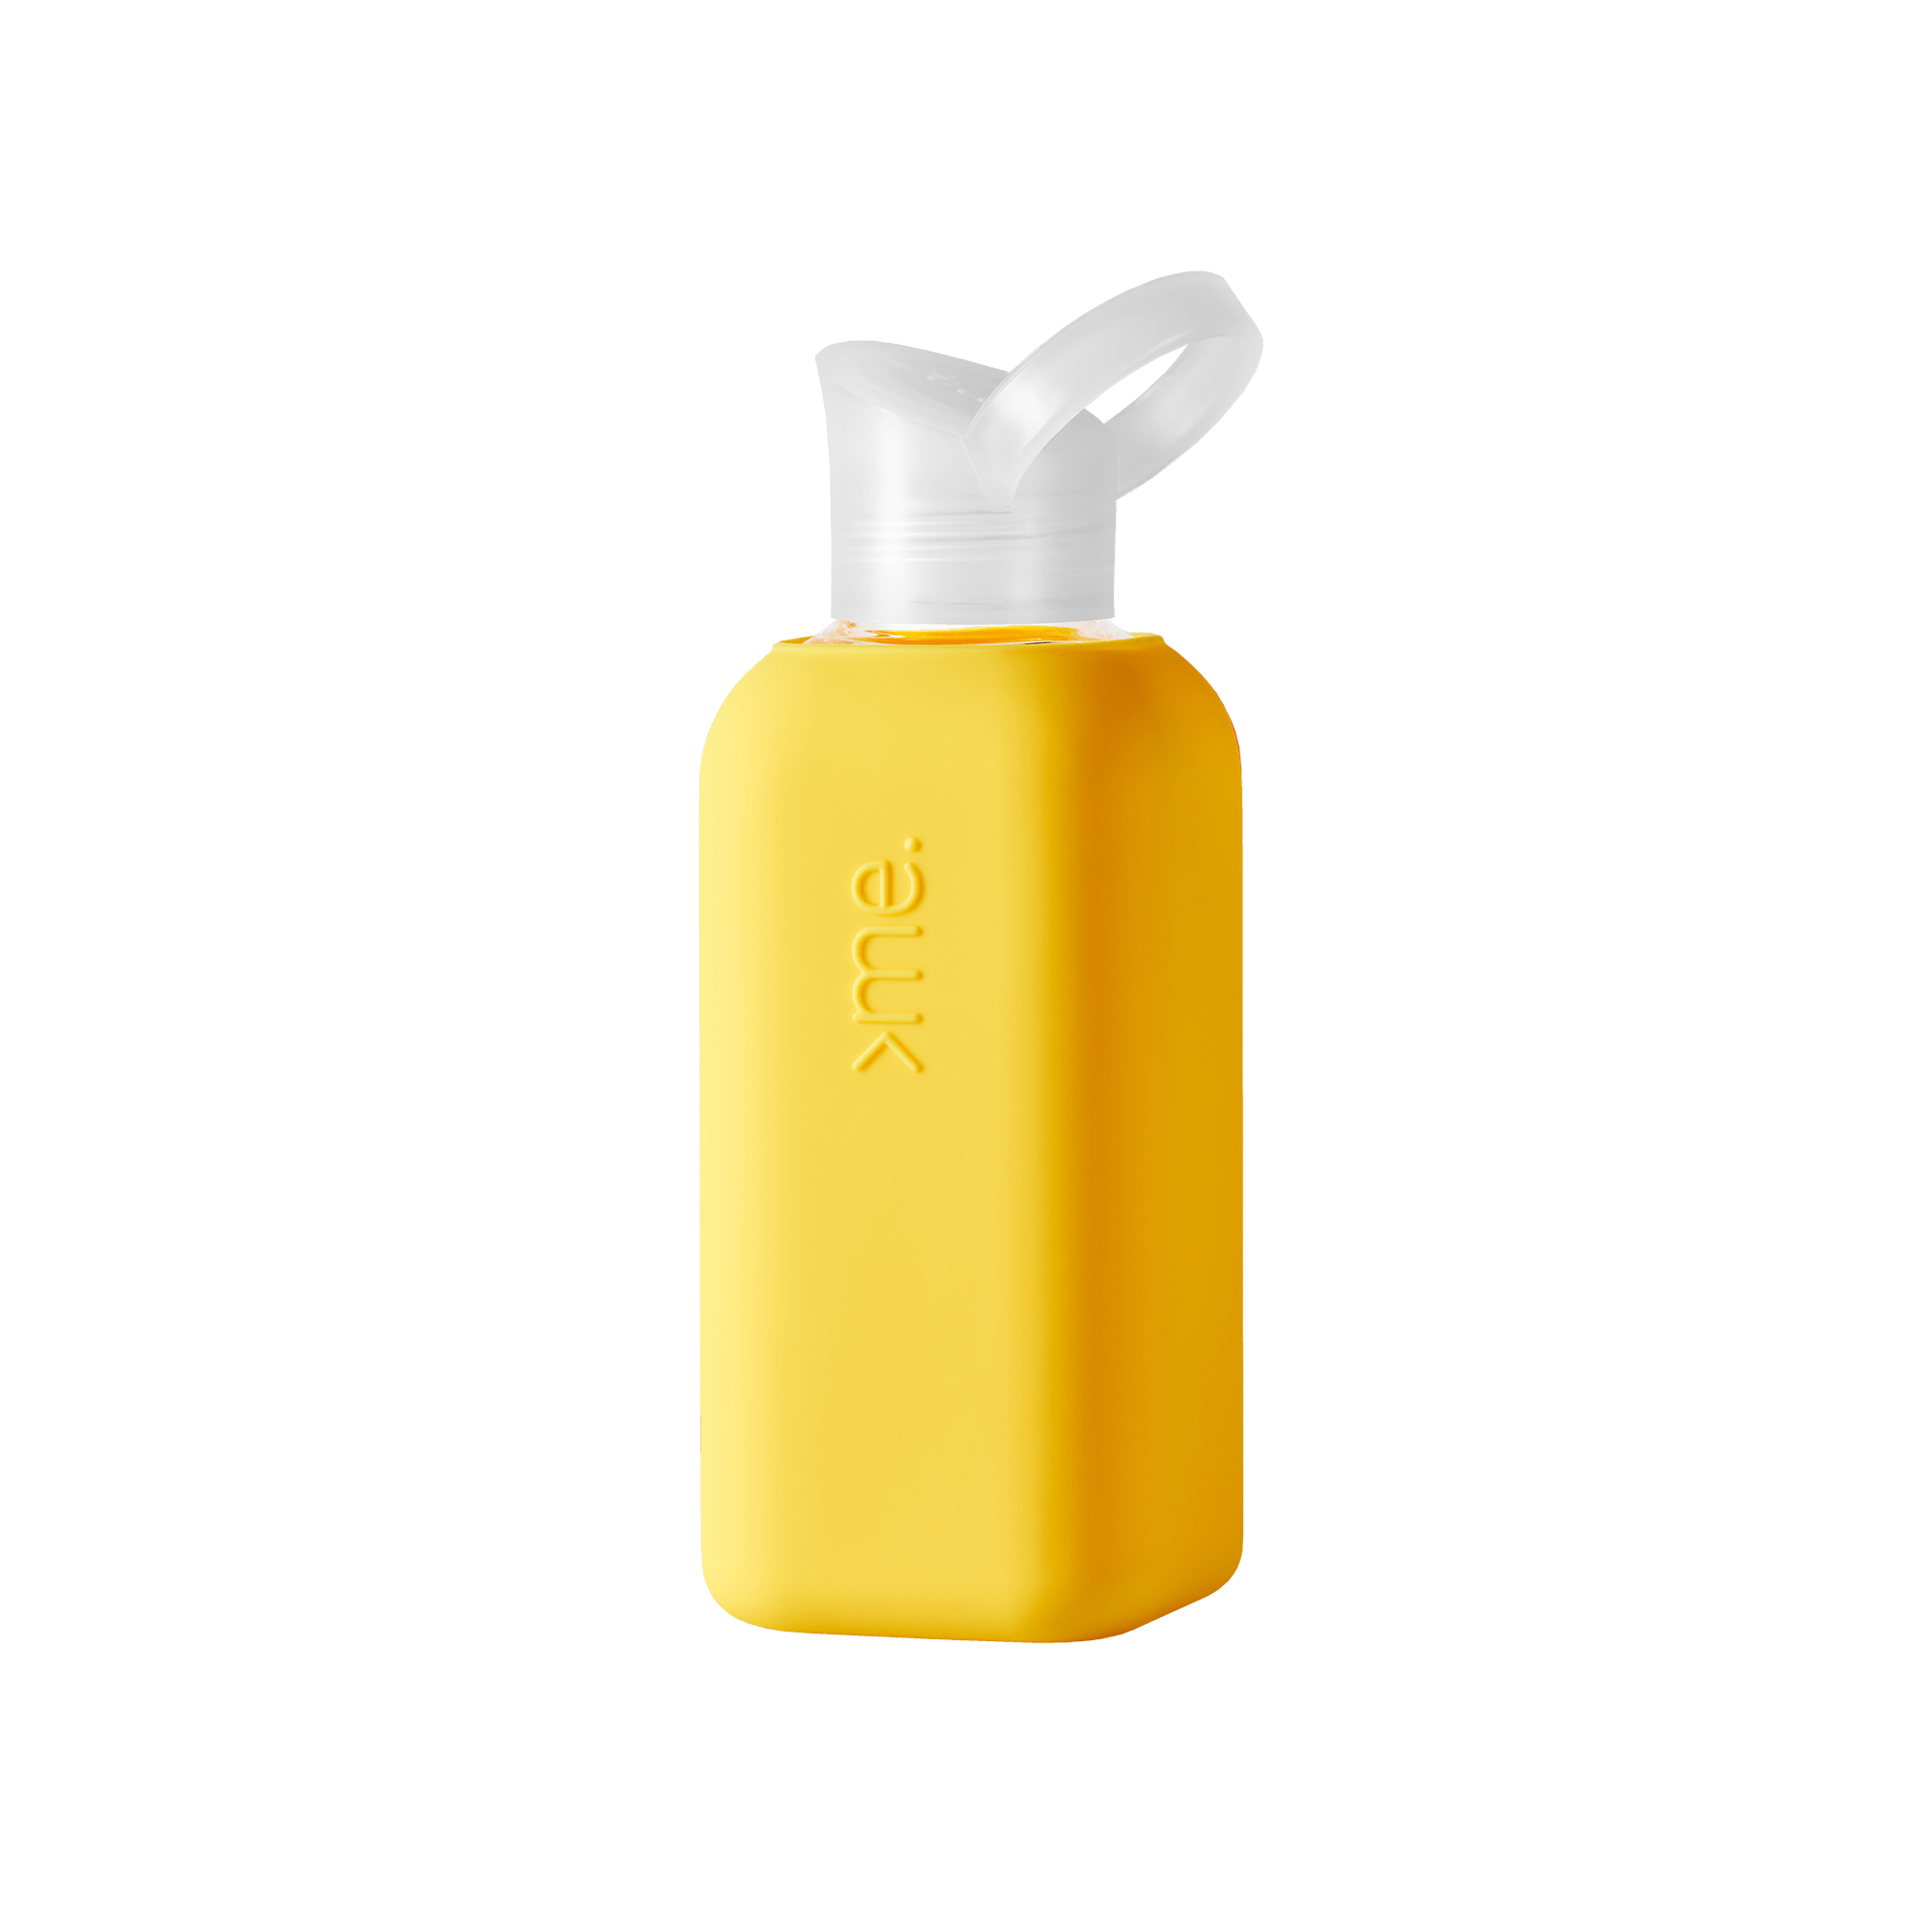 Squireme Glass Bottle with Silicone Sleeve.